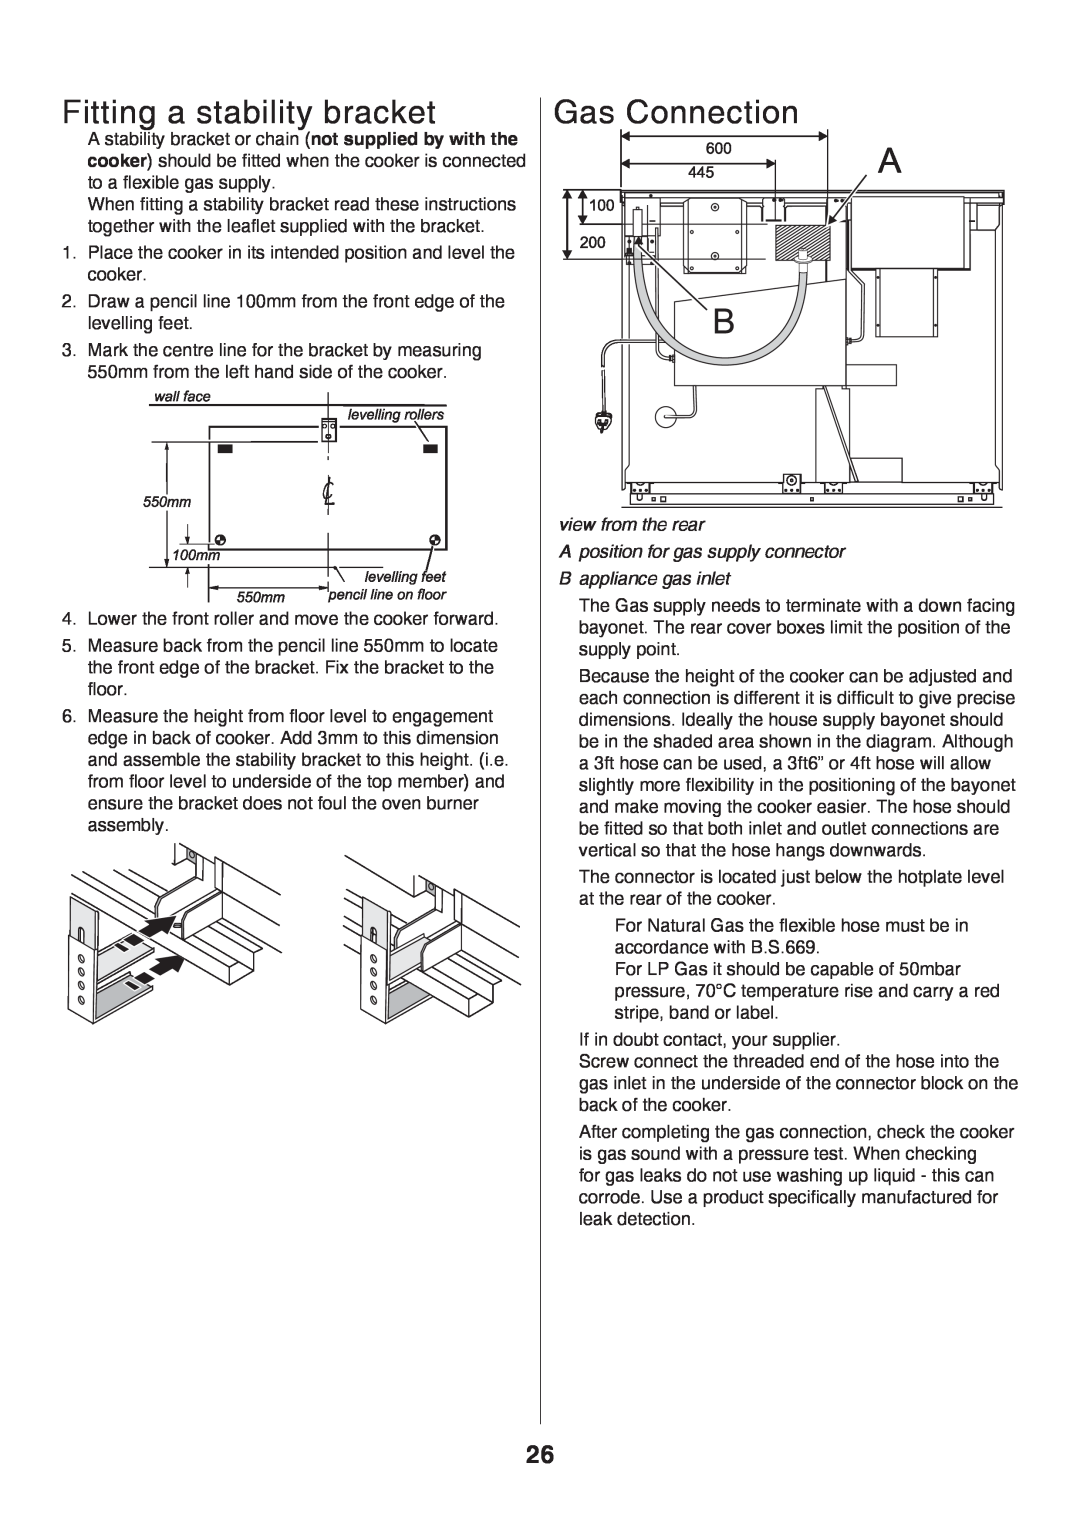 Rangemaster U106140-05 manual Fitting a stability bracket, Gas Connection, view from the rear 